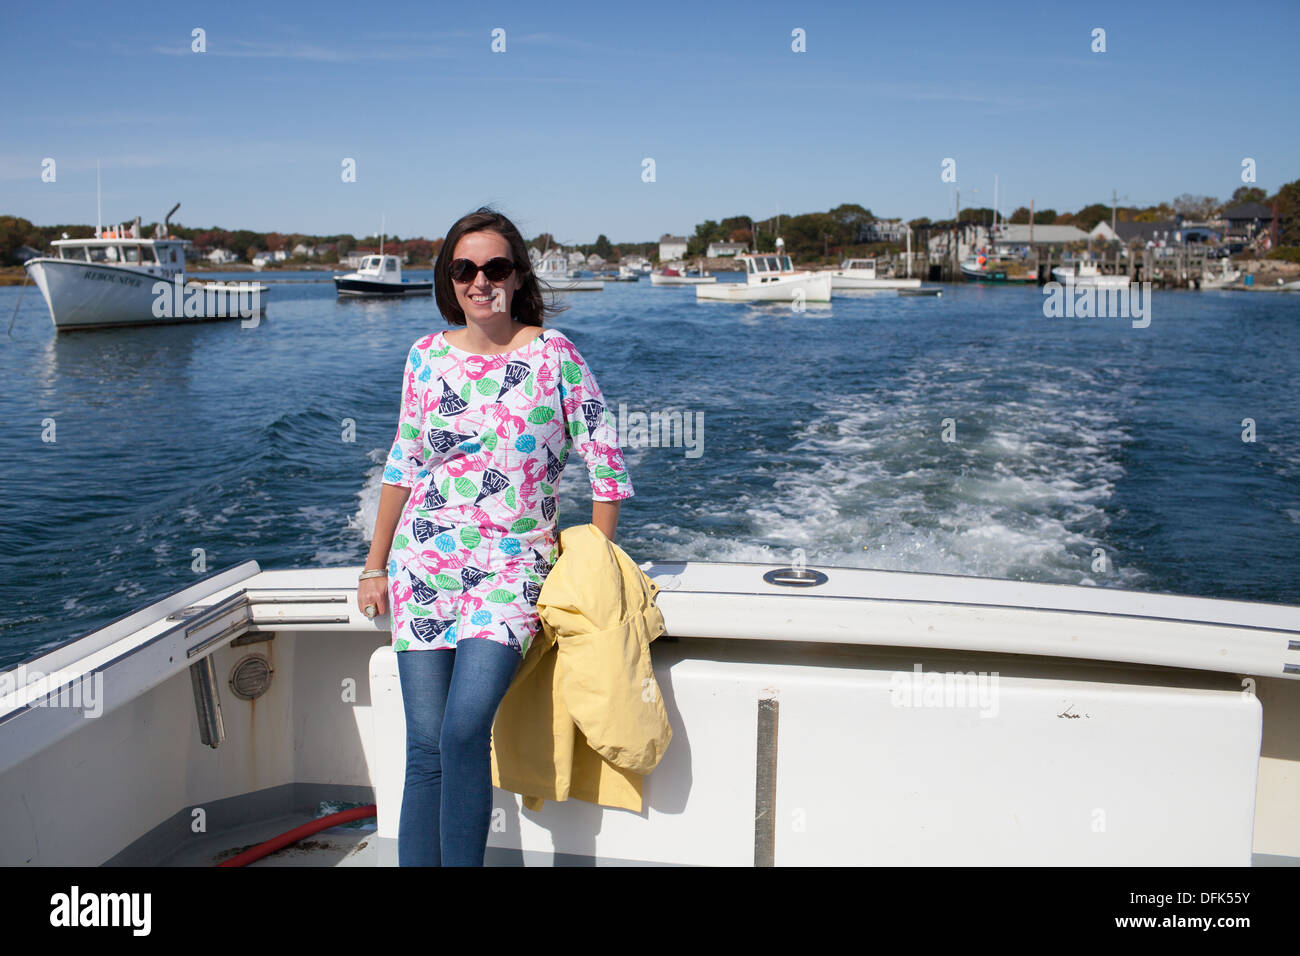 Sally Lerman, journalist, going out on lobster boat. Stock Photo